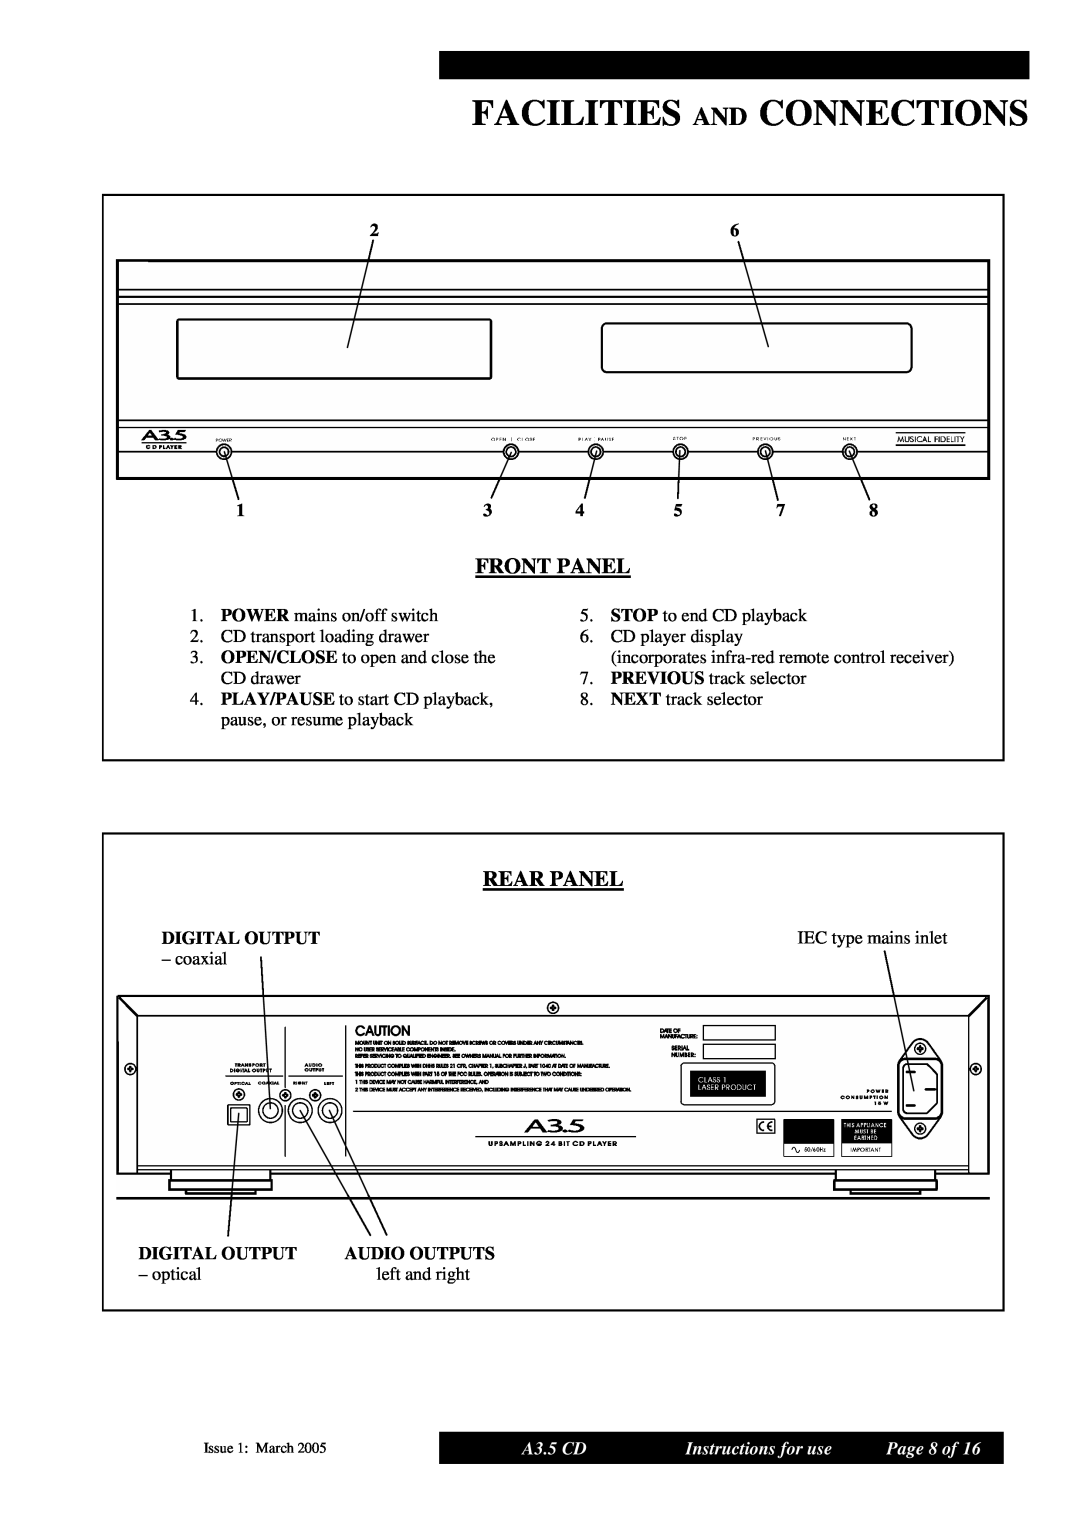 Musical Fidelity manual Facilities And Connections, Front Panel, Rear Panel, A3.5 CD, Instructions for use, Page 8 of 